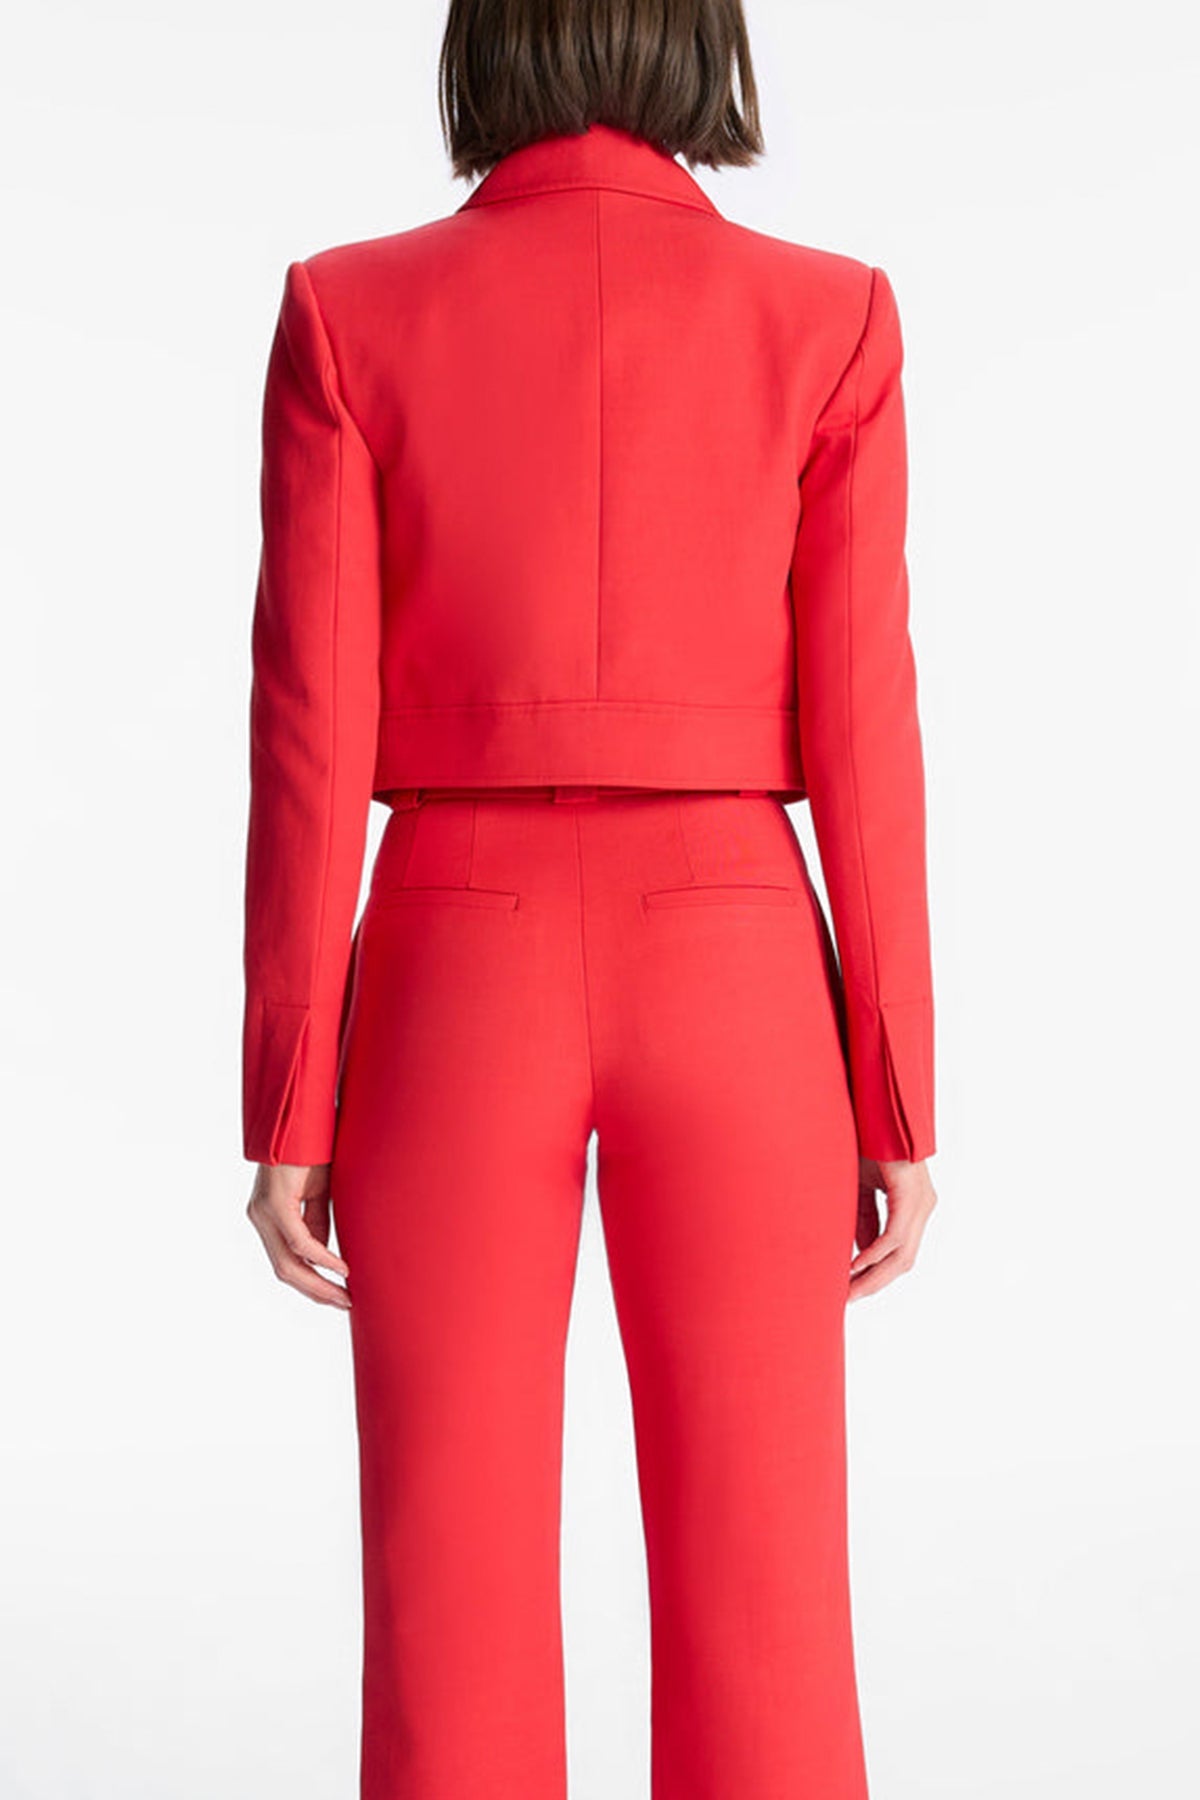 Reeve Cropped Jacket in Ruby - shop-olivia.com